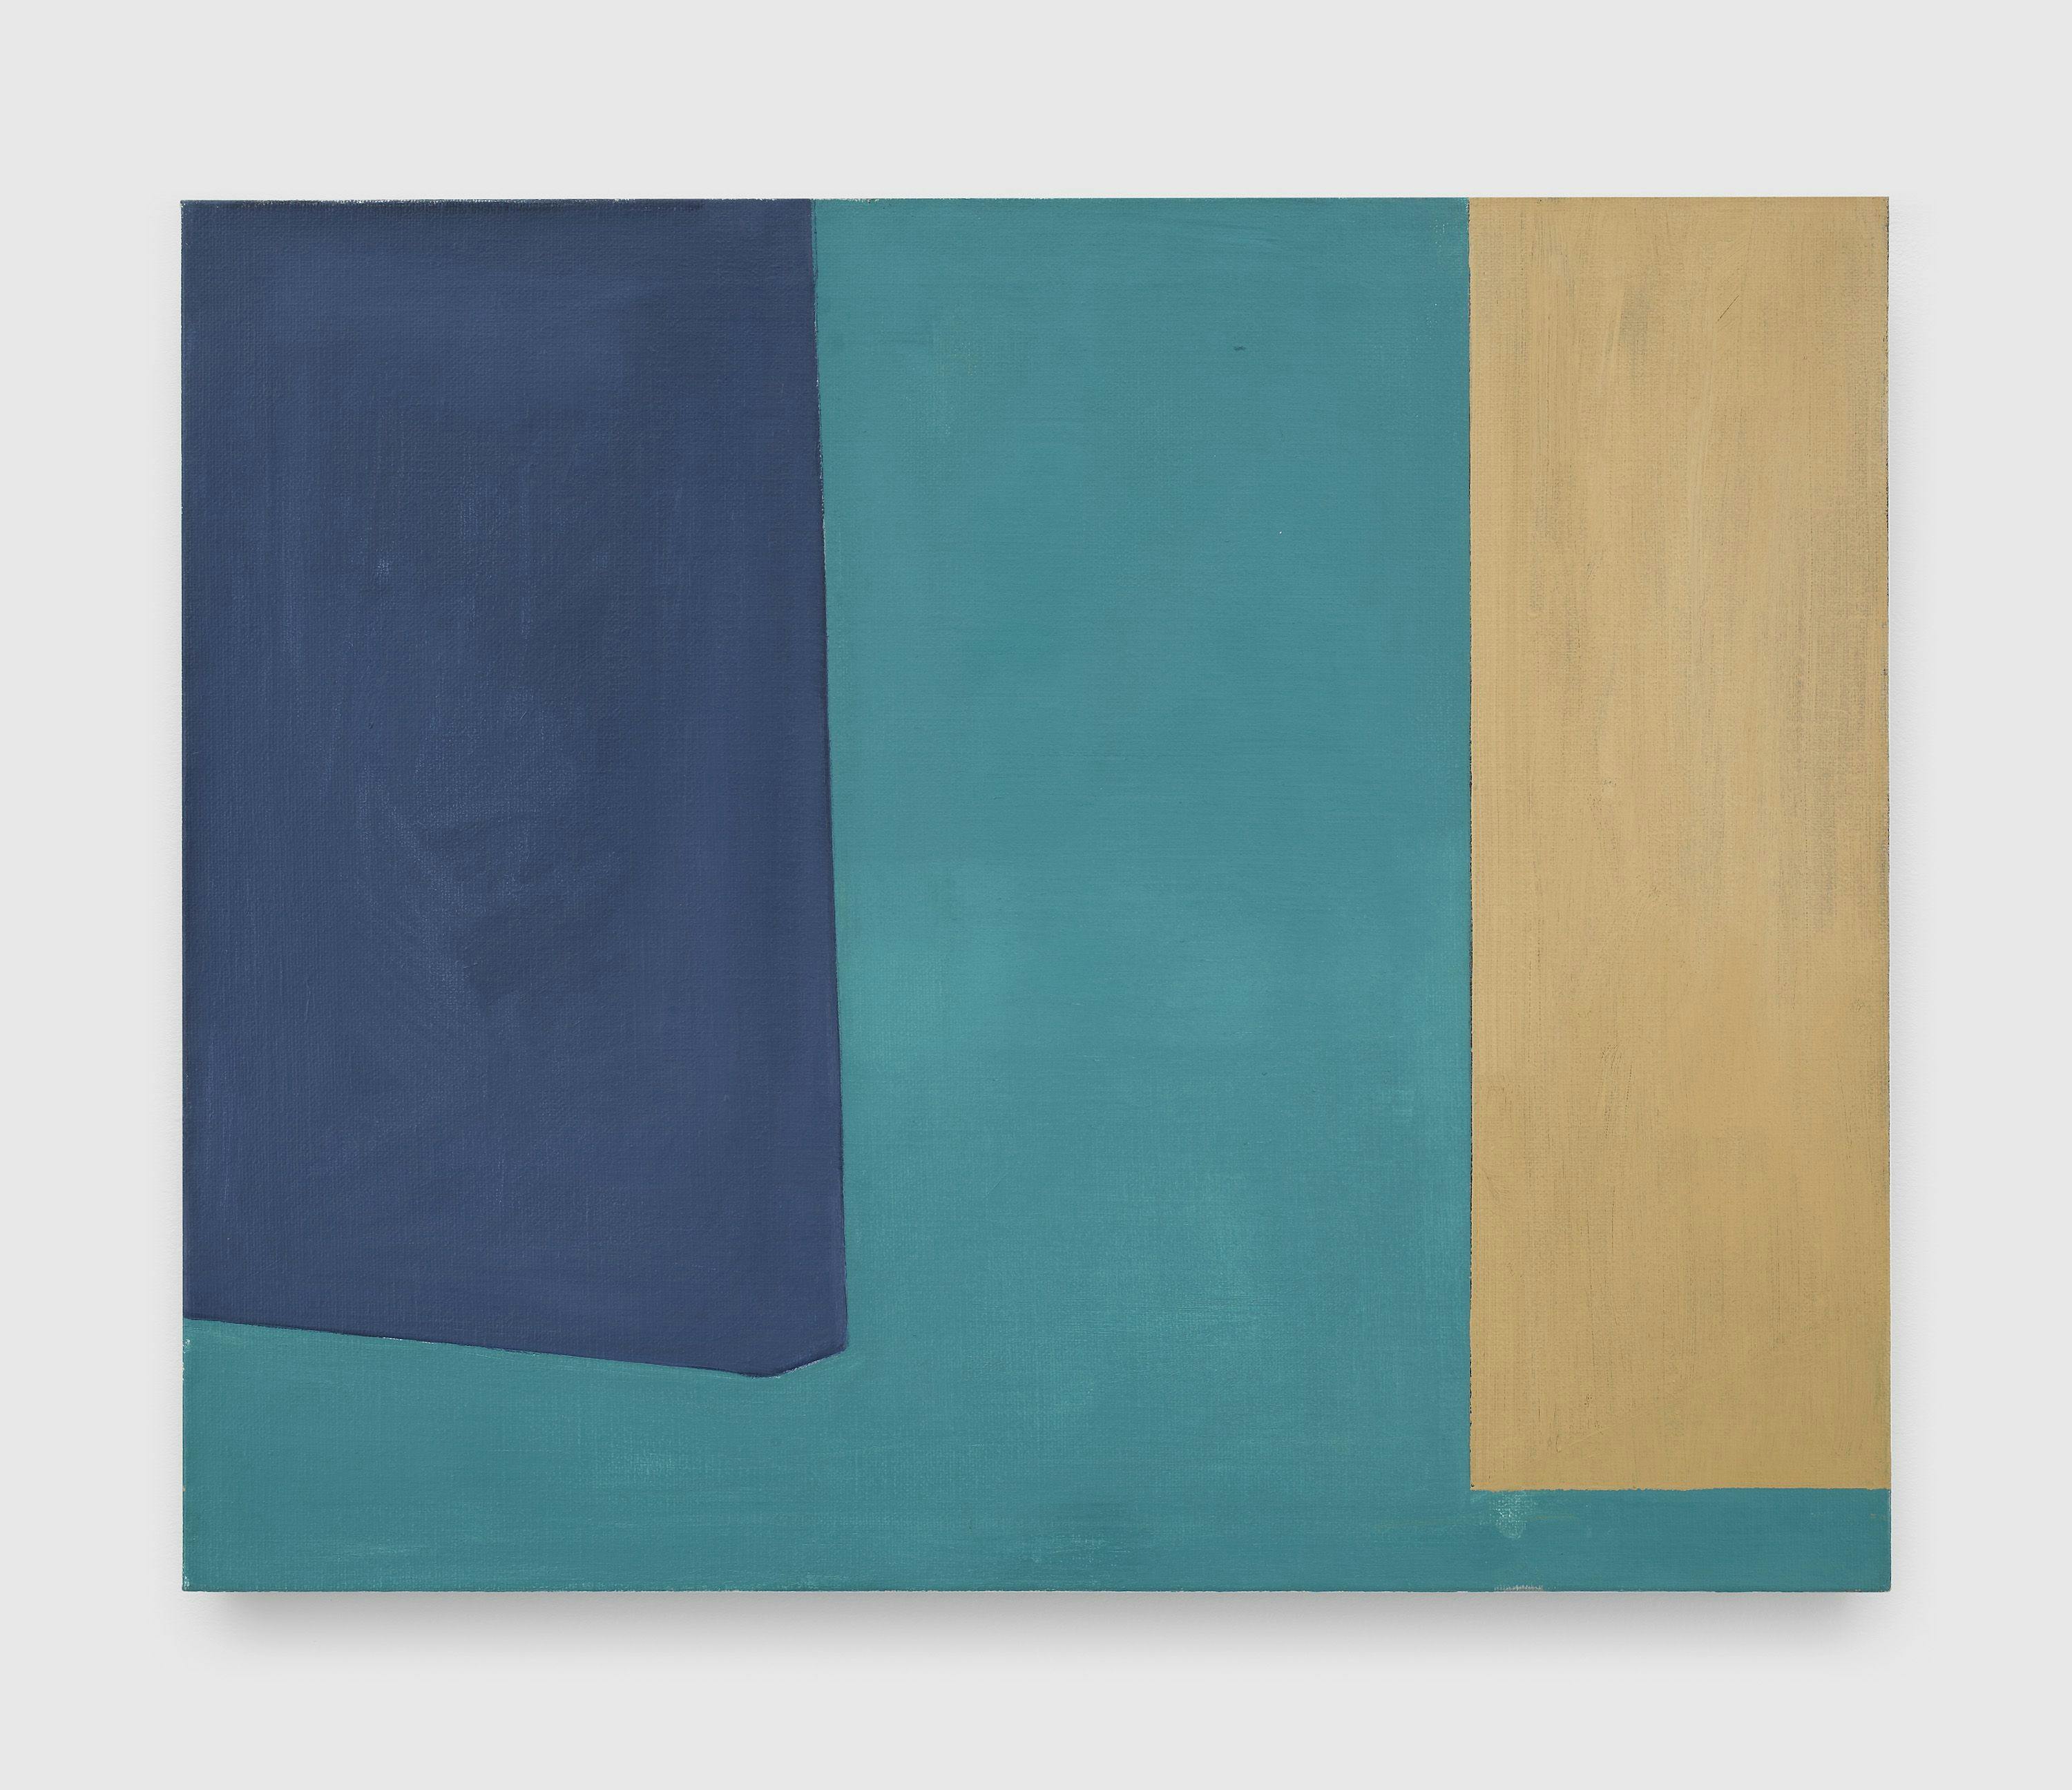 A painting by Raoul De Keyser, titled Kabinet, dated 1989.